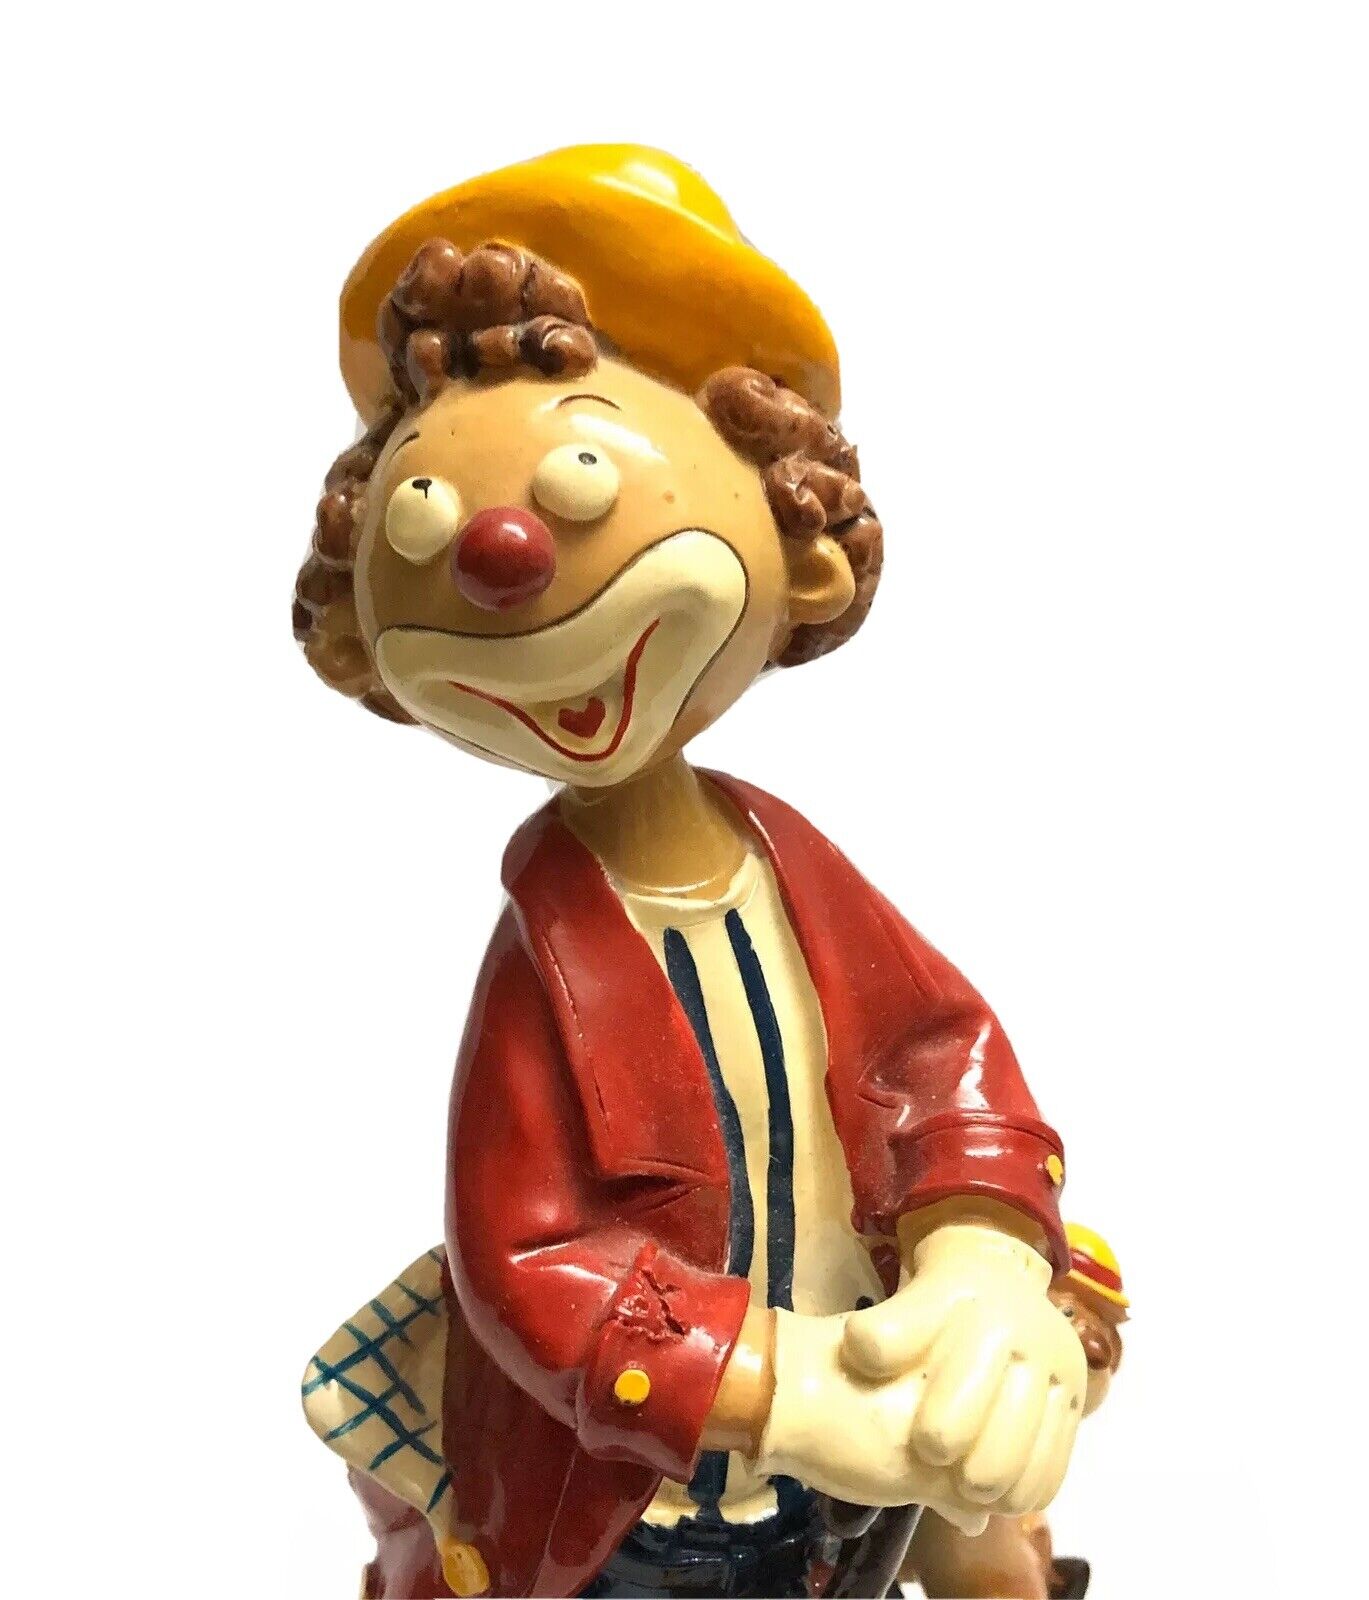 Vintage Clown Sculpture Resin Happy Clown With Dog Figurine 9” Tall